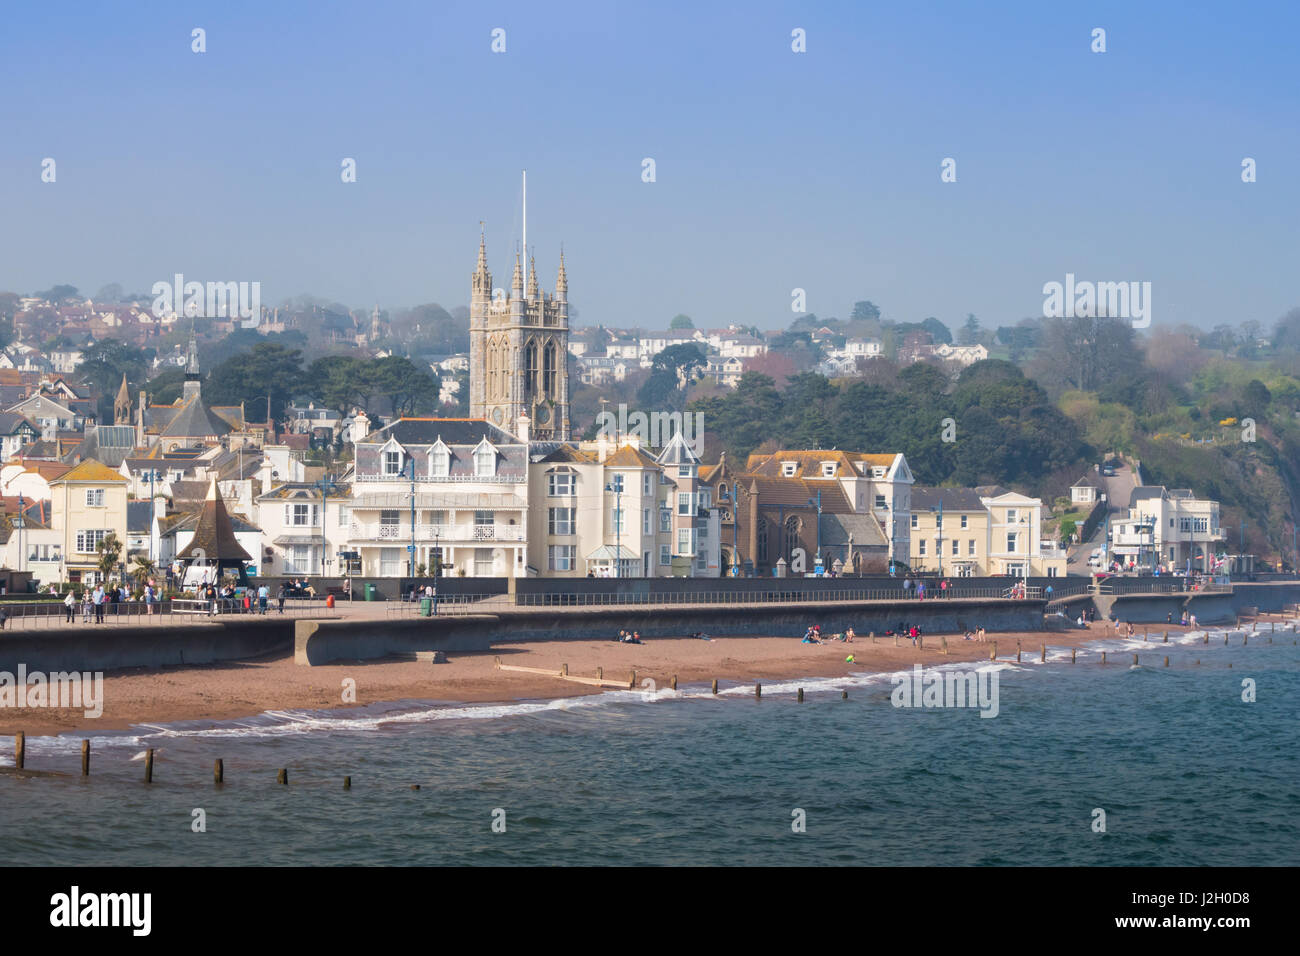 Views of Teignmouth sea front on a sunny Spring day with people walking along the promenade. St Michaels church is prominent in the background. Stock Photo